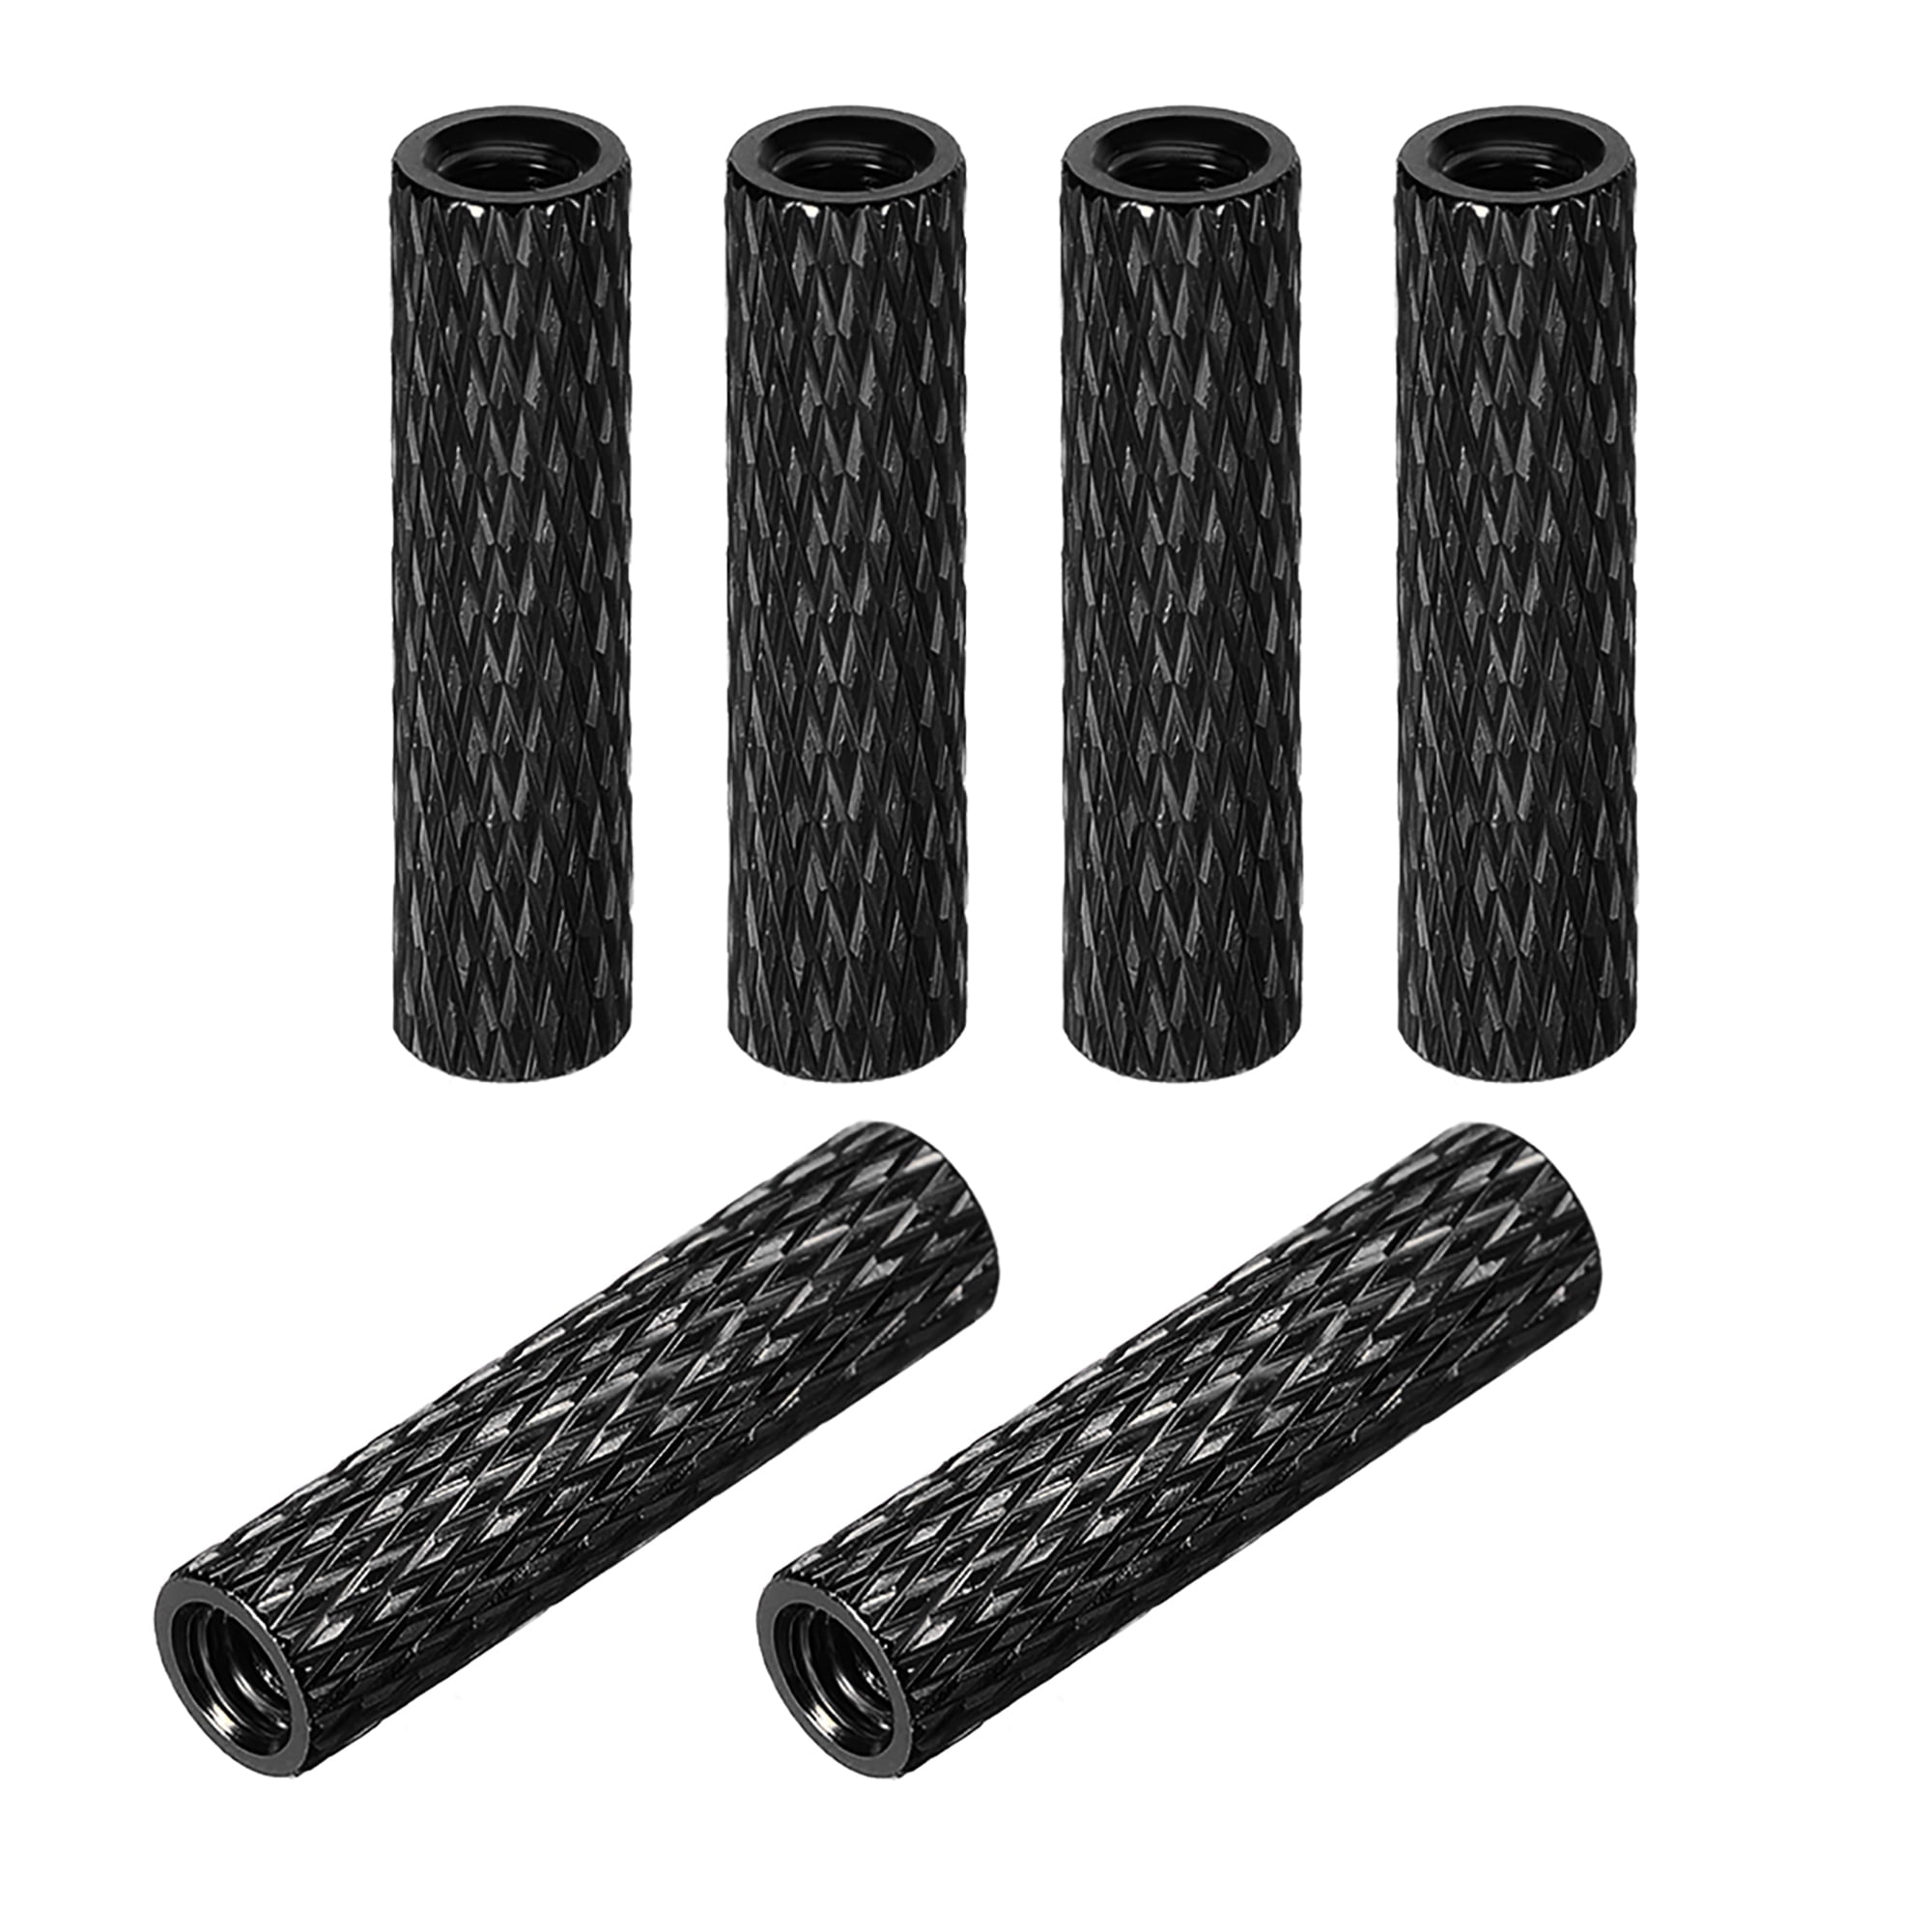 M3x20mm Aluminum Standoff with Mesh Texture Column Spacer for RC ...